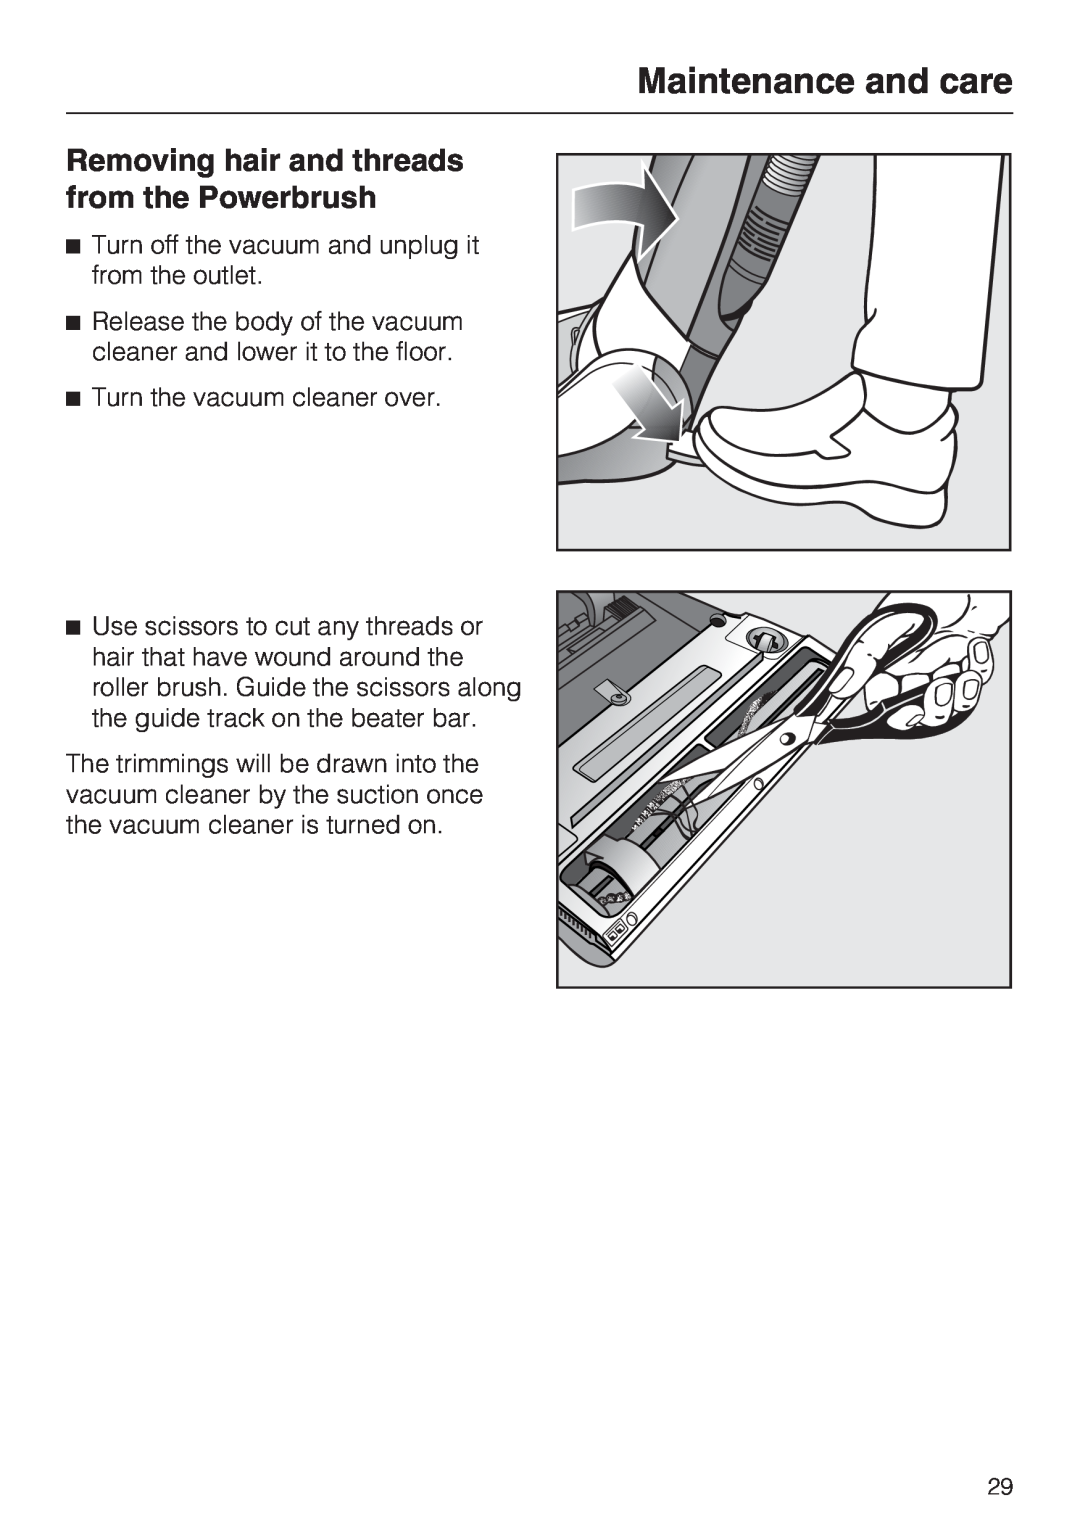 Miele S 7000 operating instructions Removing hair and threads from the Powerbrush, Maintenance and care 